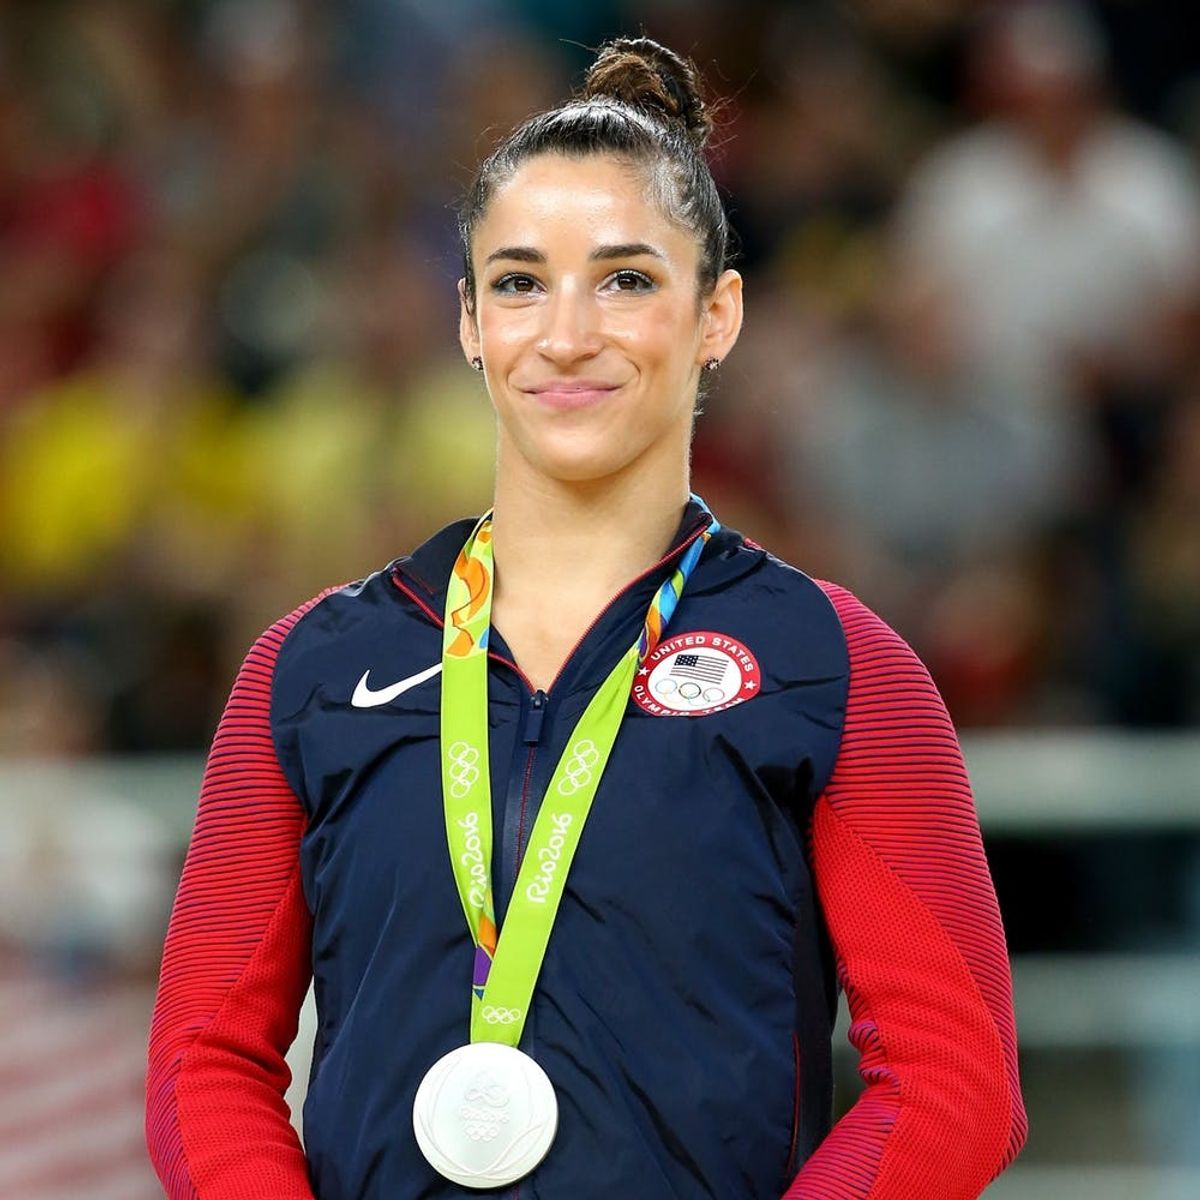 Aly Raisman on Her Powerful Testimony During Larry Nassar’s Trial: “I Felt Like I Was Going to Compete”